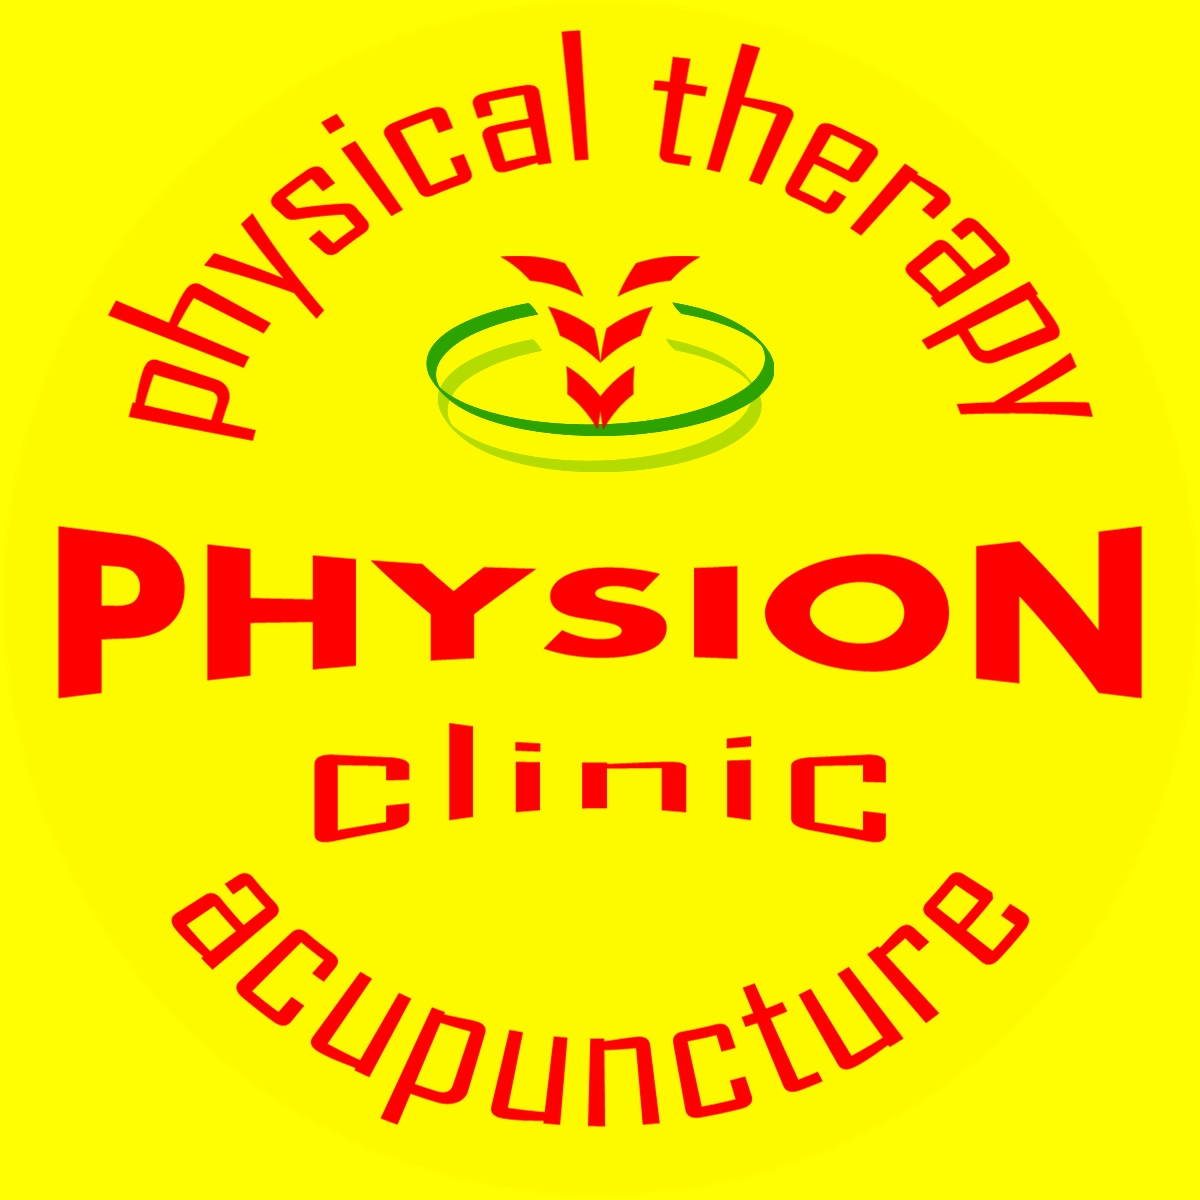 Prices-Physion Clinic